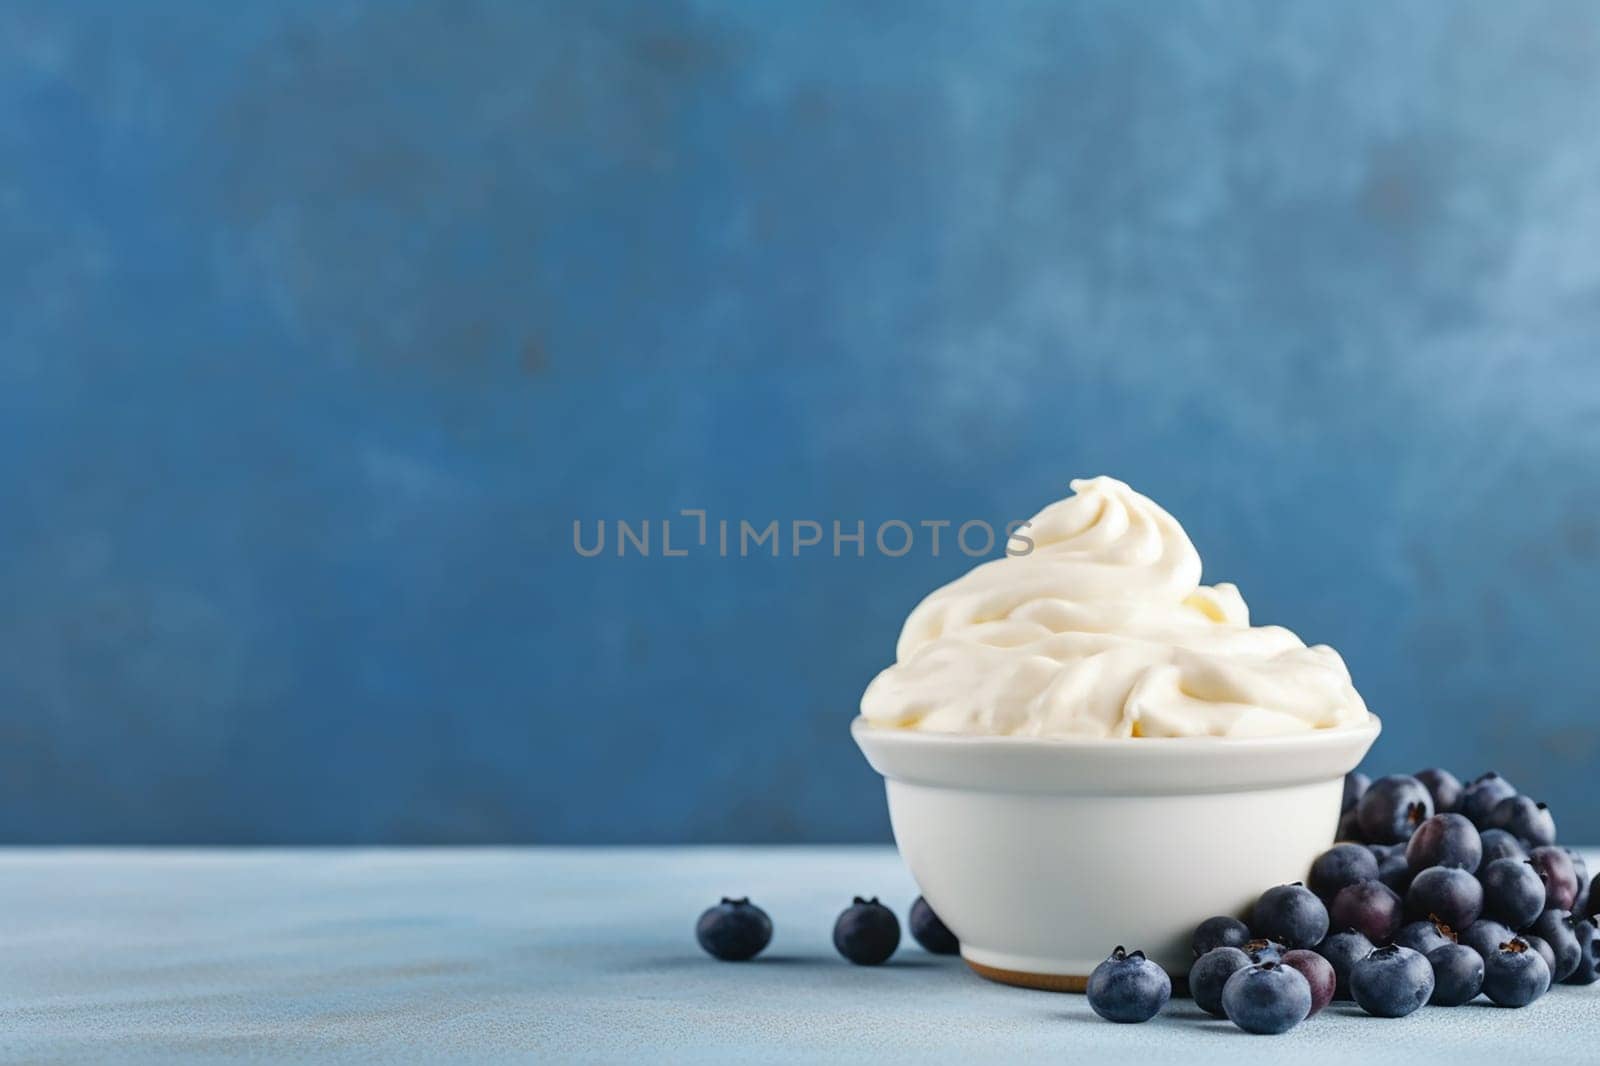 A blueberry yogurt ice cream in a white bowl surrounded by fresh blueberries. by Hype2art